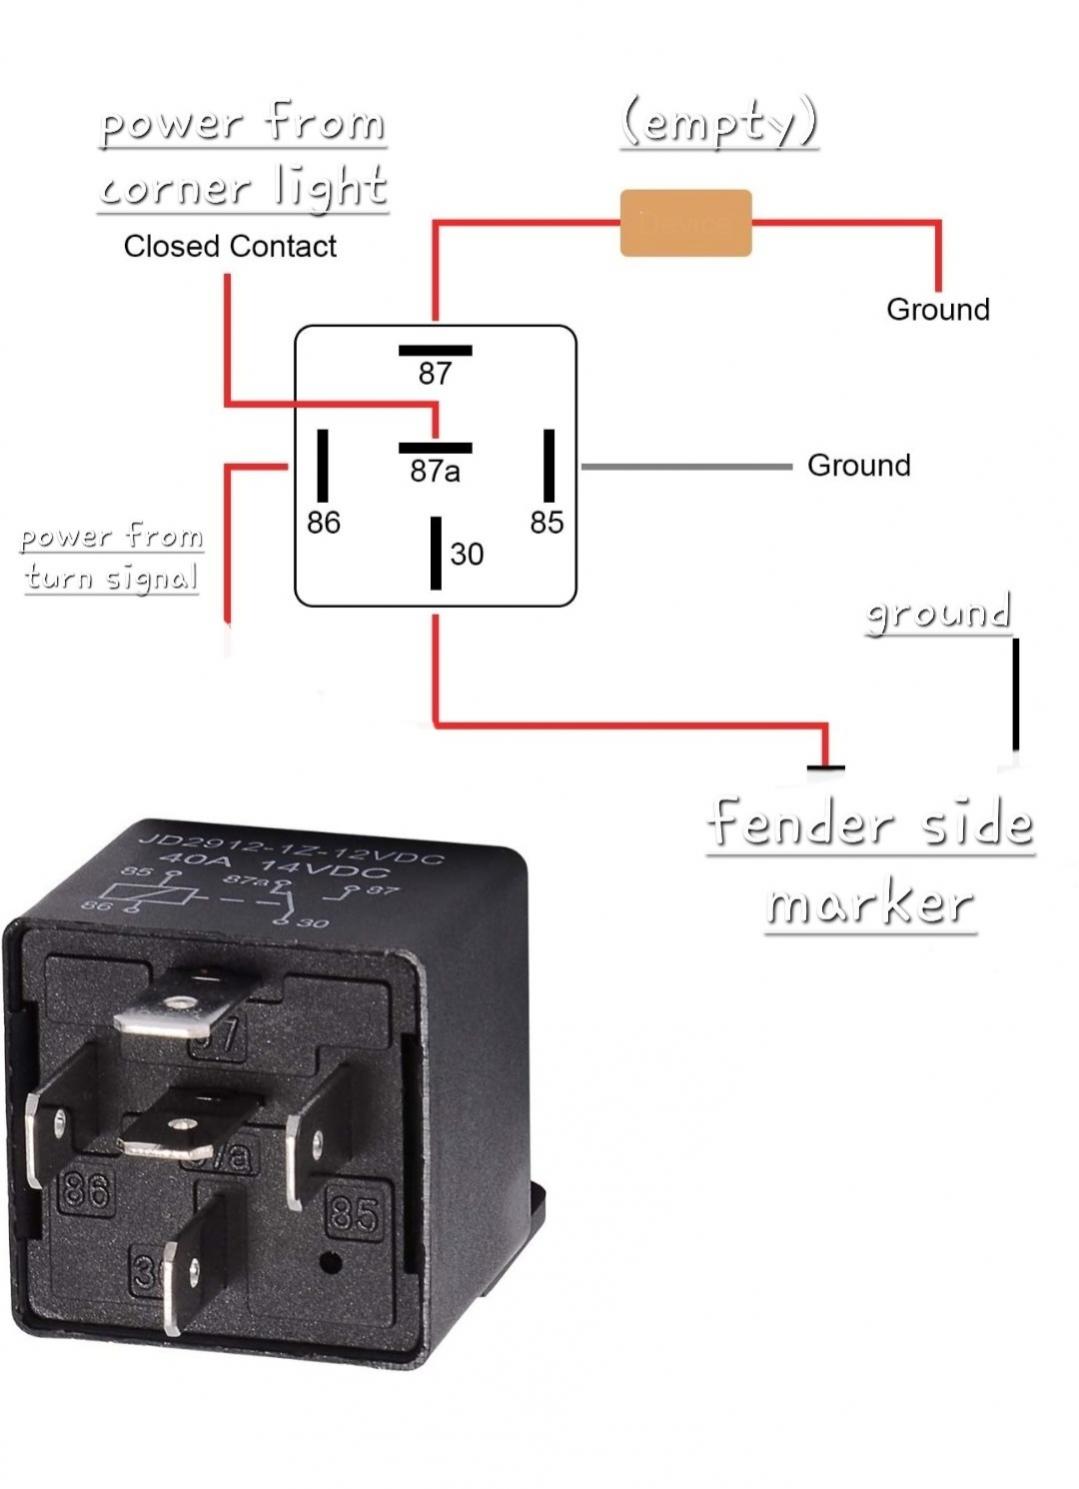 Fender side markers - need wiring advice-relay-jpg